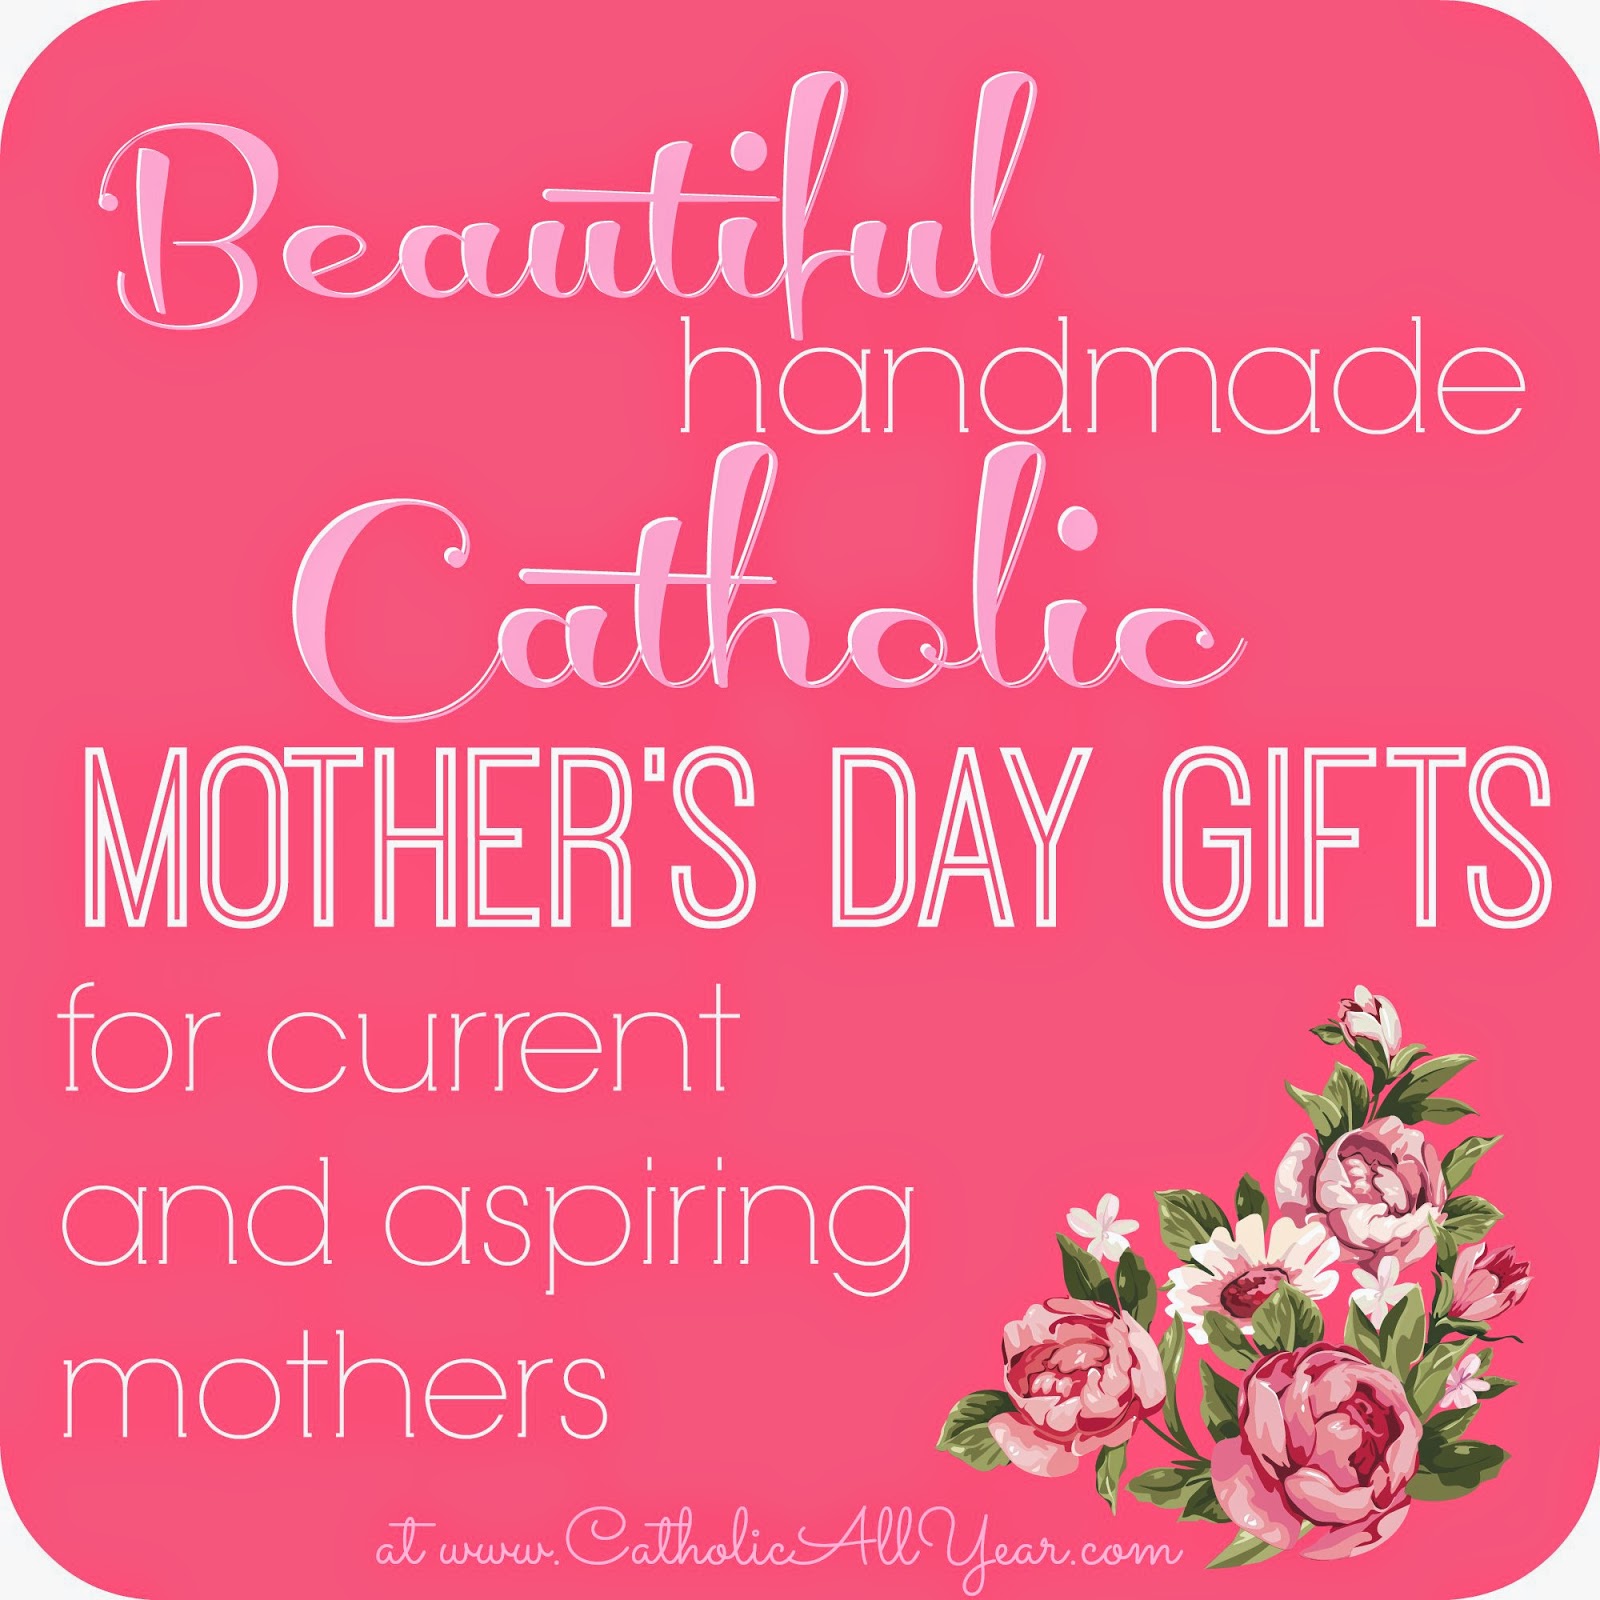 Beautiful Handmade Catholic Mother s Day Gifts for Current and Aspiring Mothers a giveaway